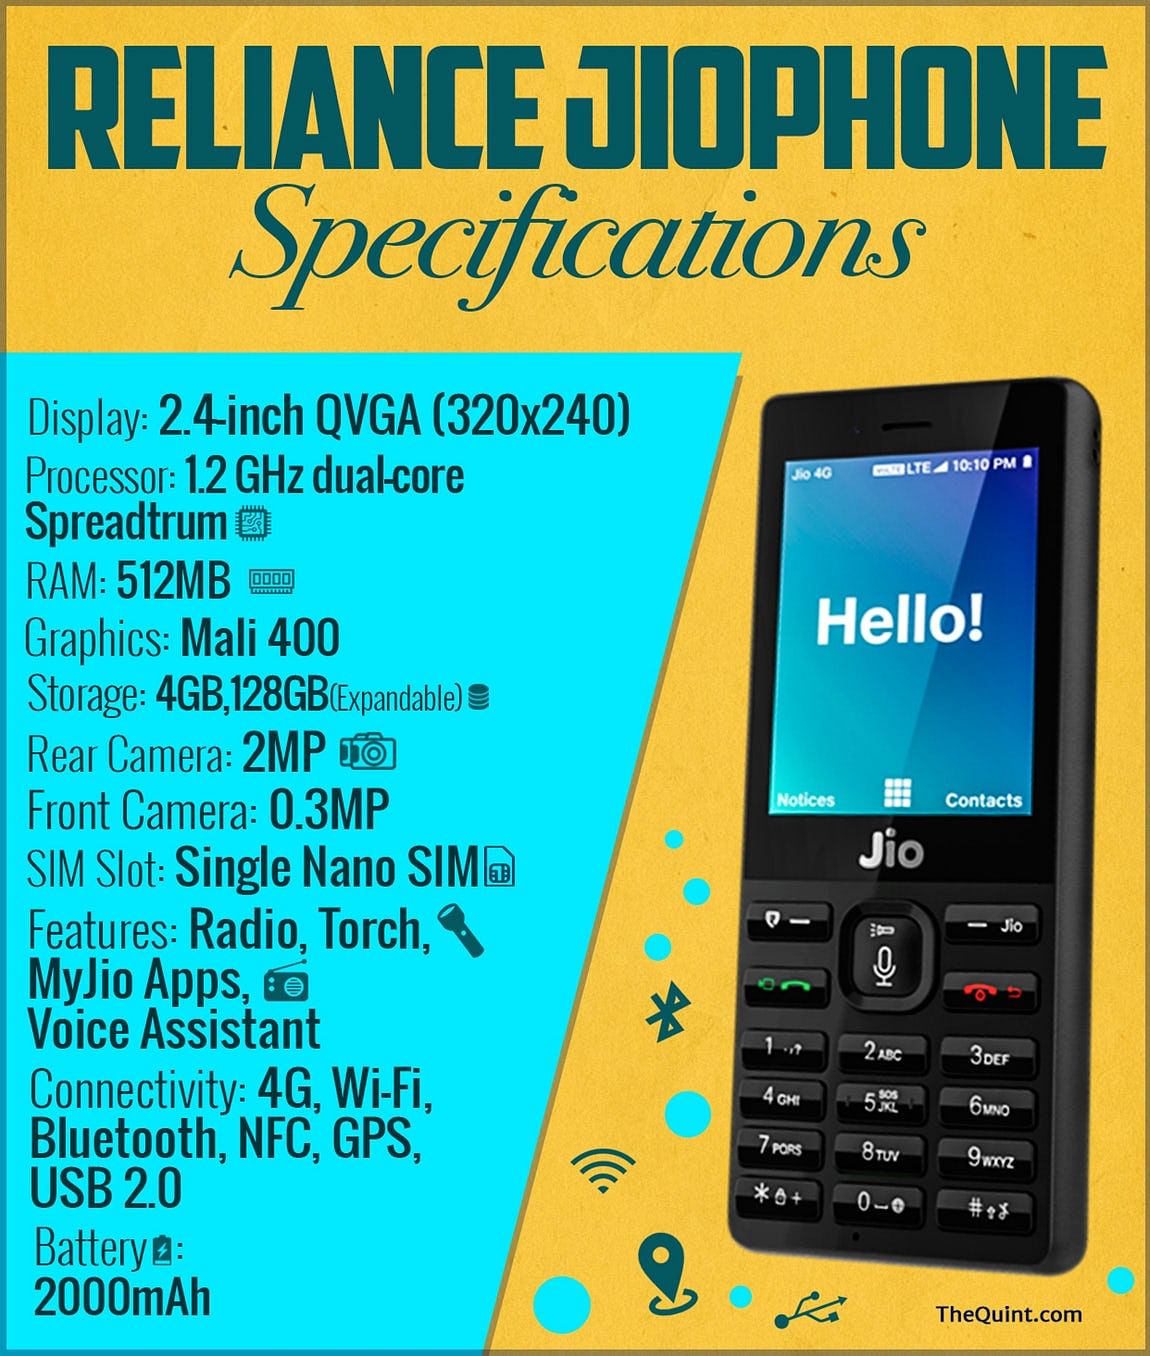 Not interested in buying the JioPhone? You could consider Micromax Bharat 1 or Karbonn A40 affordable phones. 